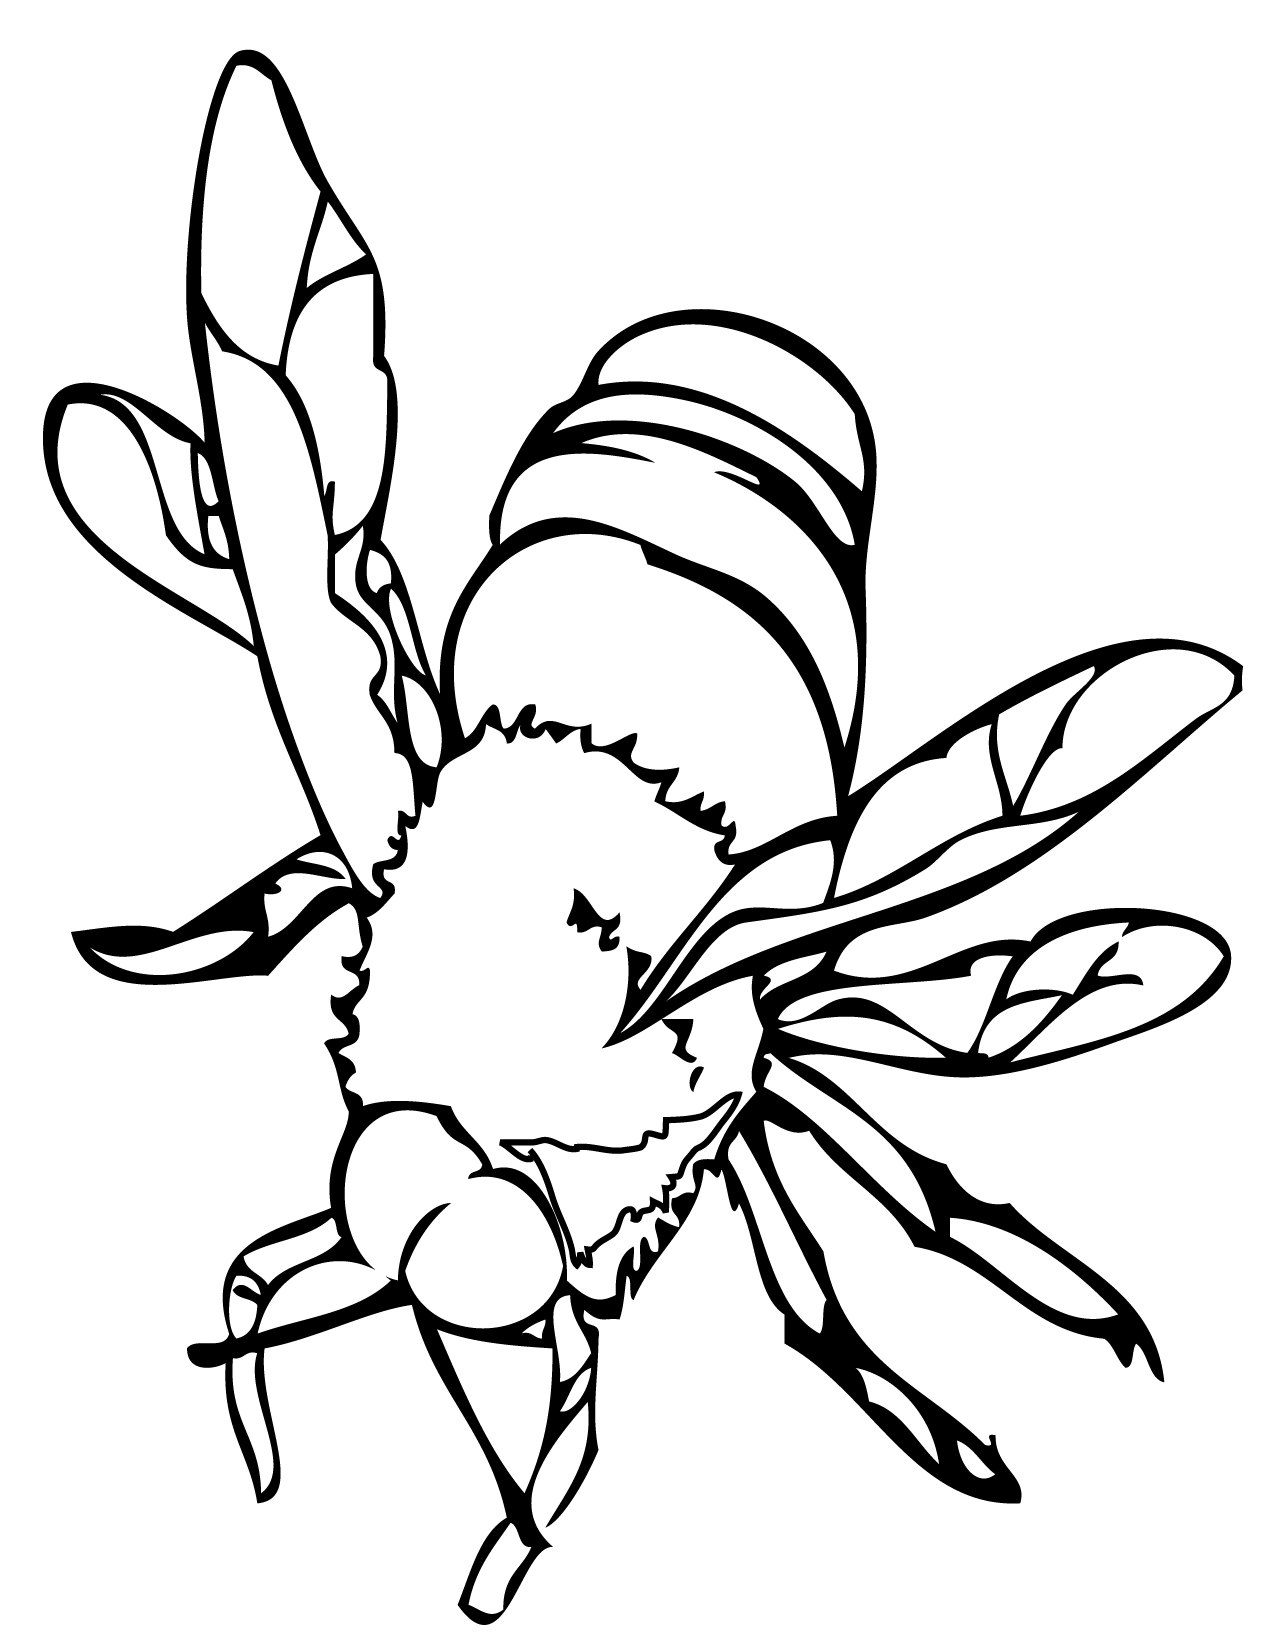 Bee coloring pages for honey lovers